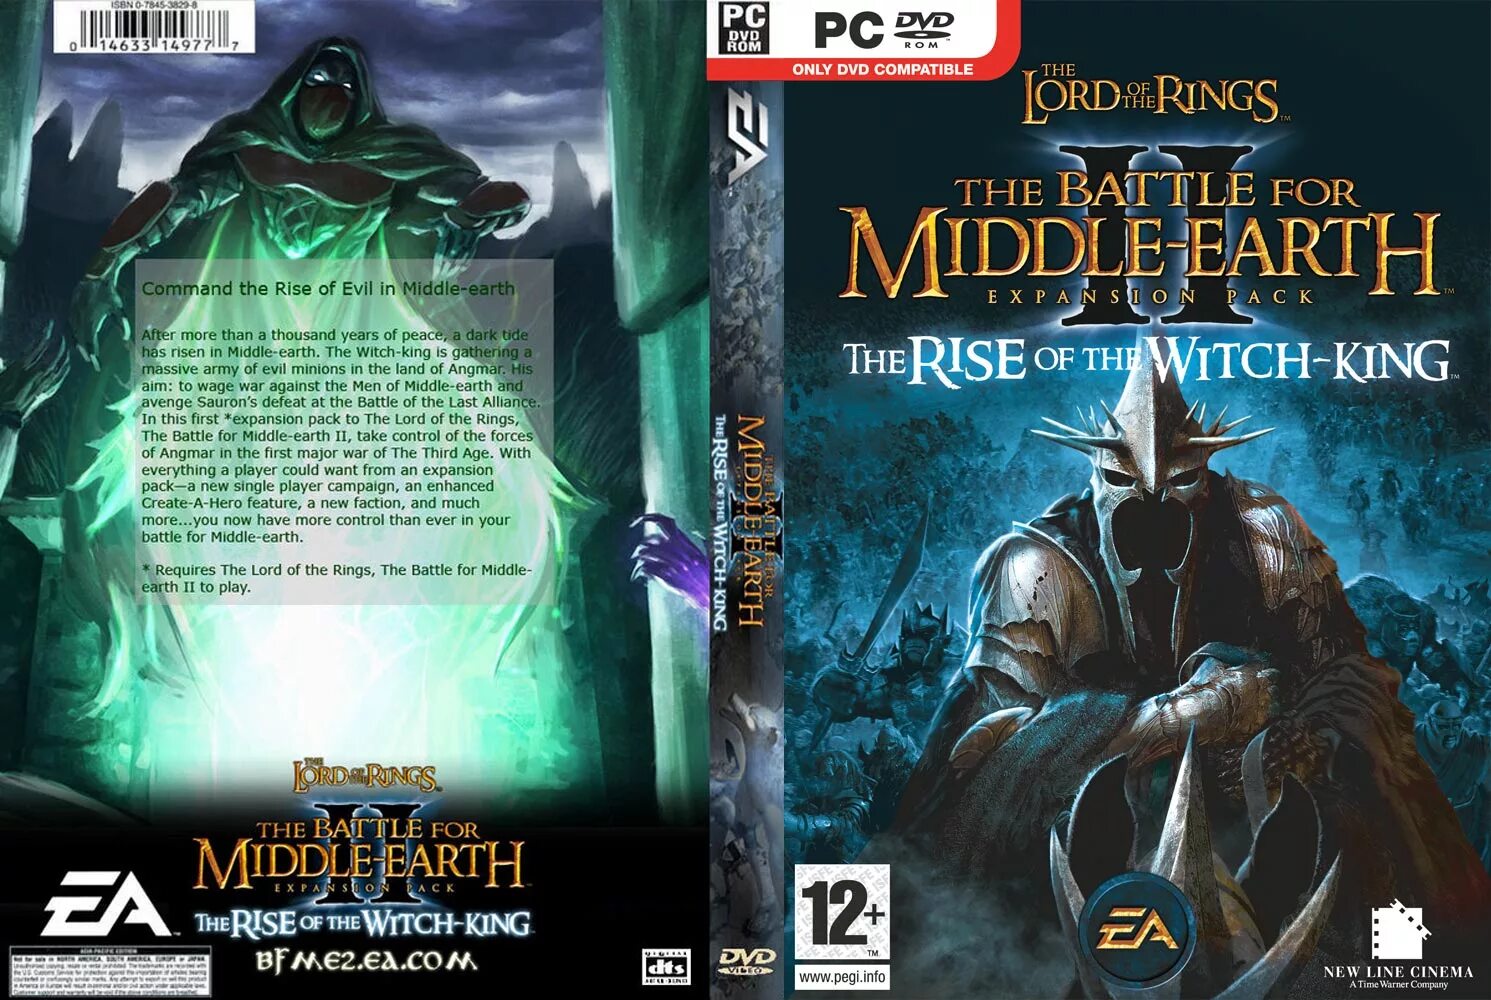 The Battle for Middle-Earth 2 диск. The Battle for Middle-Earth 2 на Xbox 360. Battle for Middle-Earth II: Rise of the Witch King. Властелин колец читы